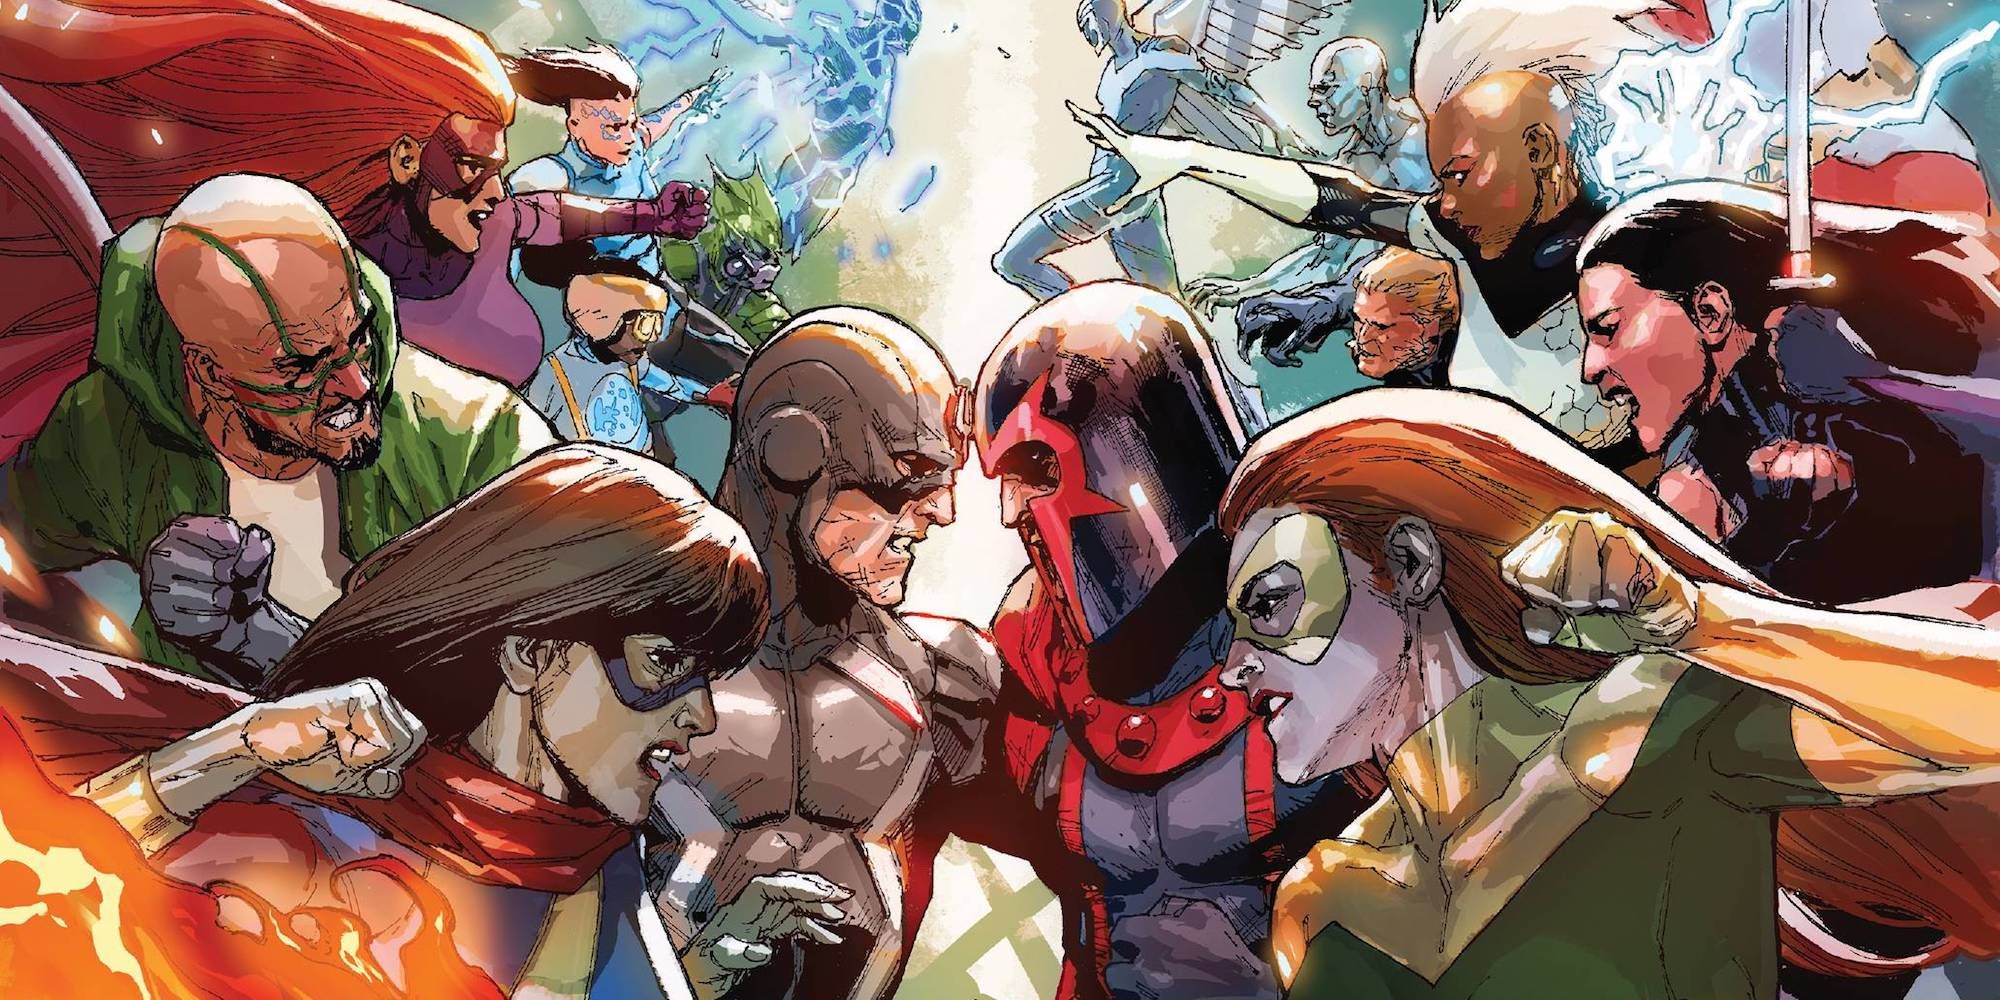 An image of The Inhumans and X-Men facing off in Marvel Comics.